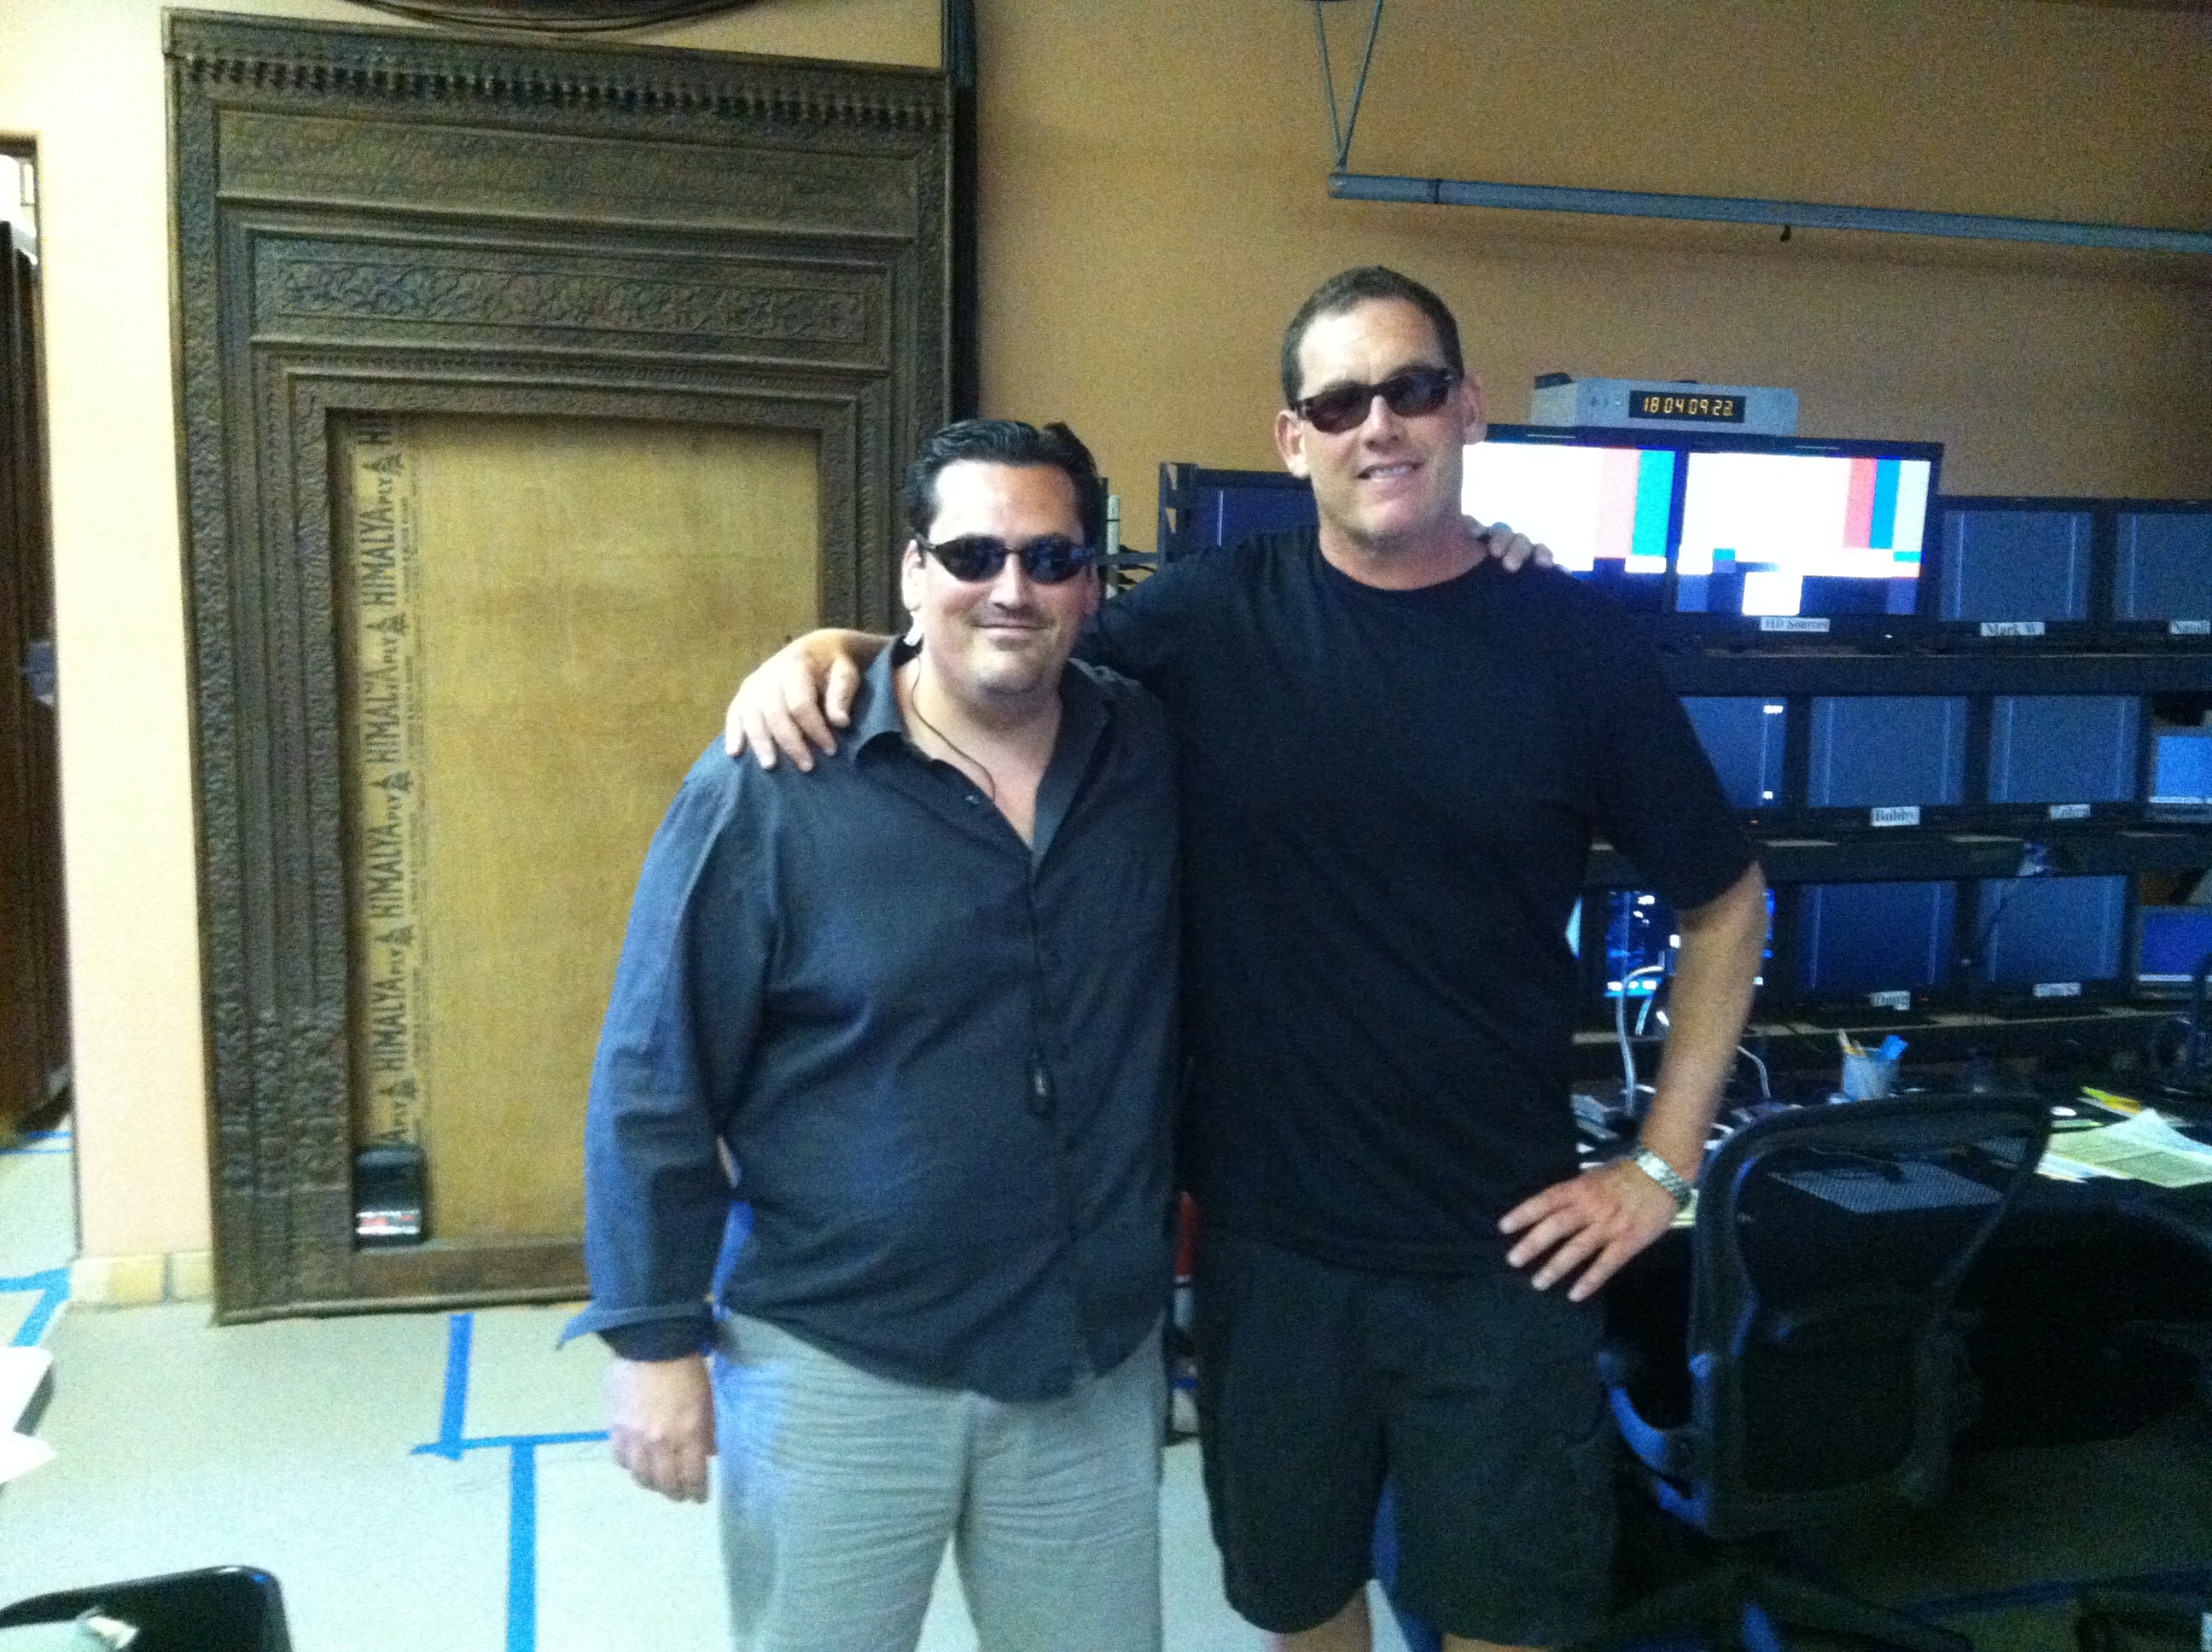 Steve Wright with Mike Fleiss (Creator of The Bachelor).